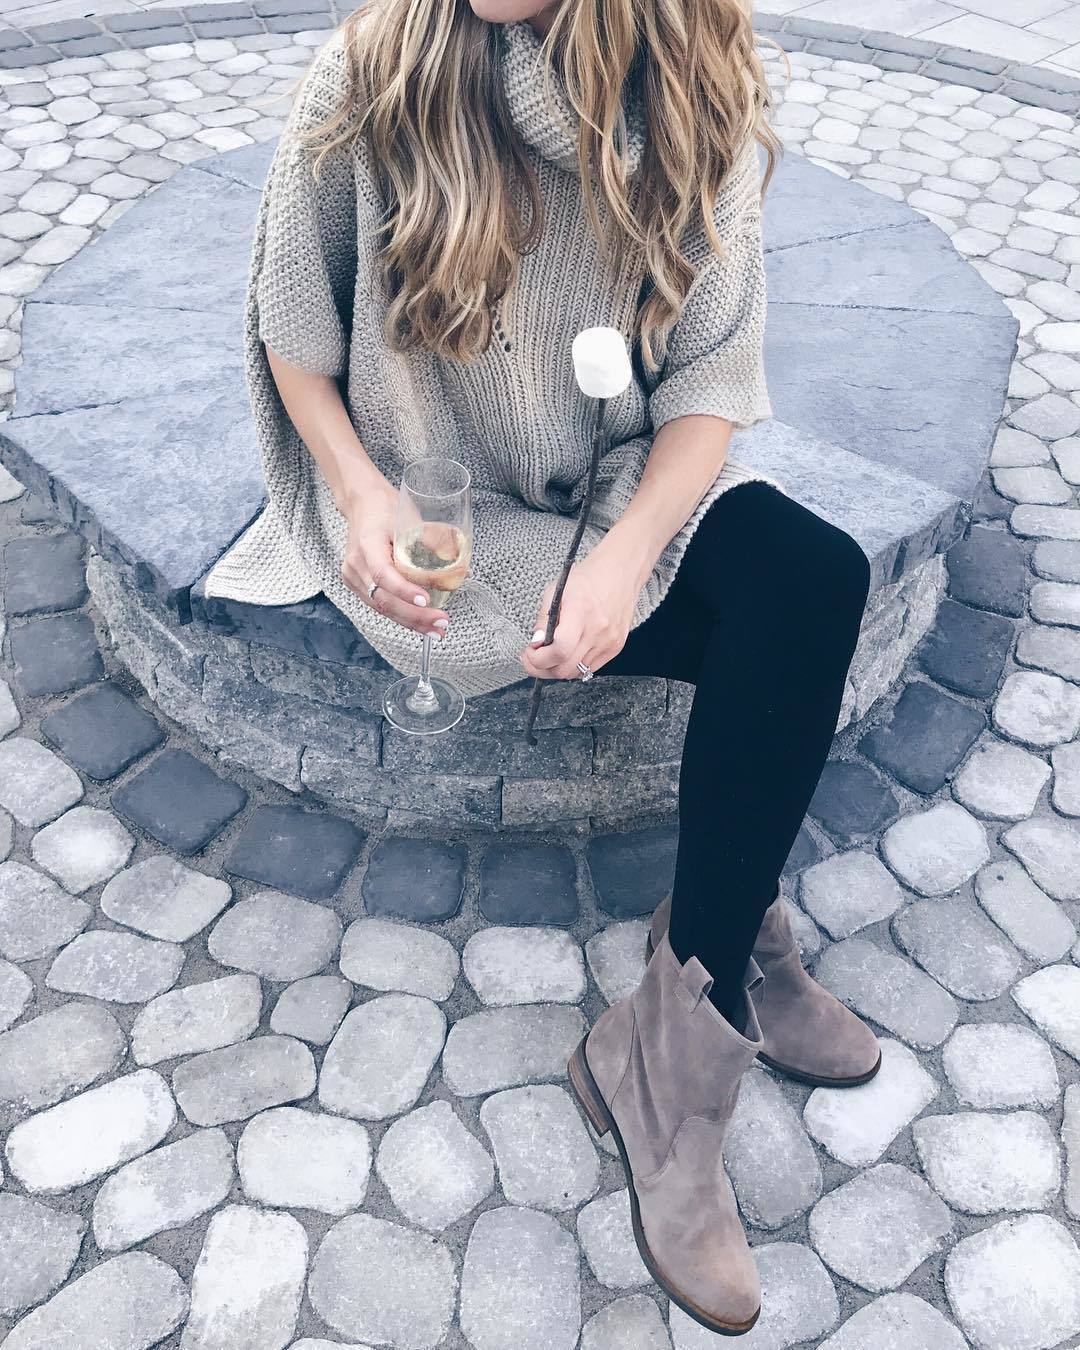 Women's Grey Knit Sweater Dress, Grey Suede Ankle Boots, Black Wool Tights